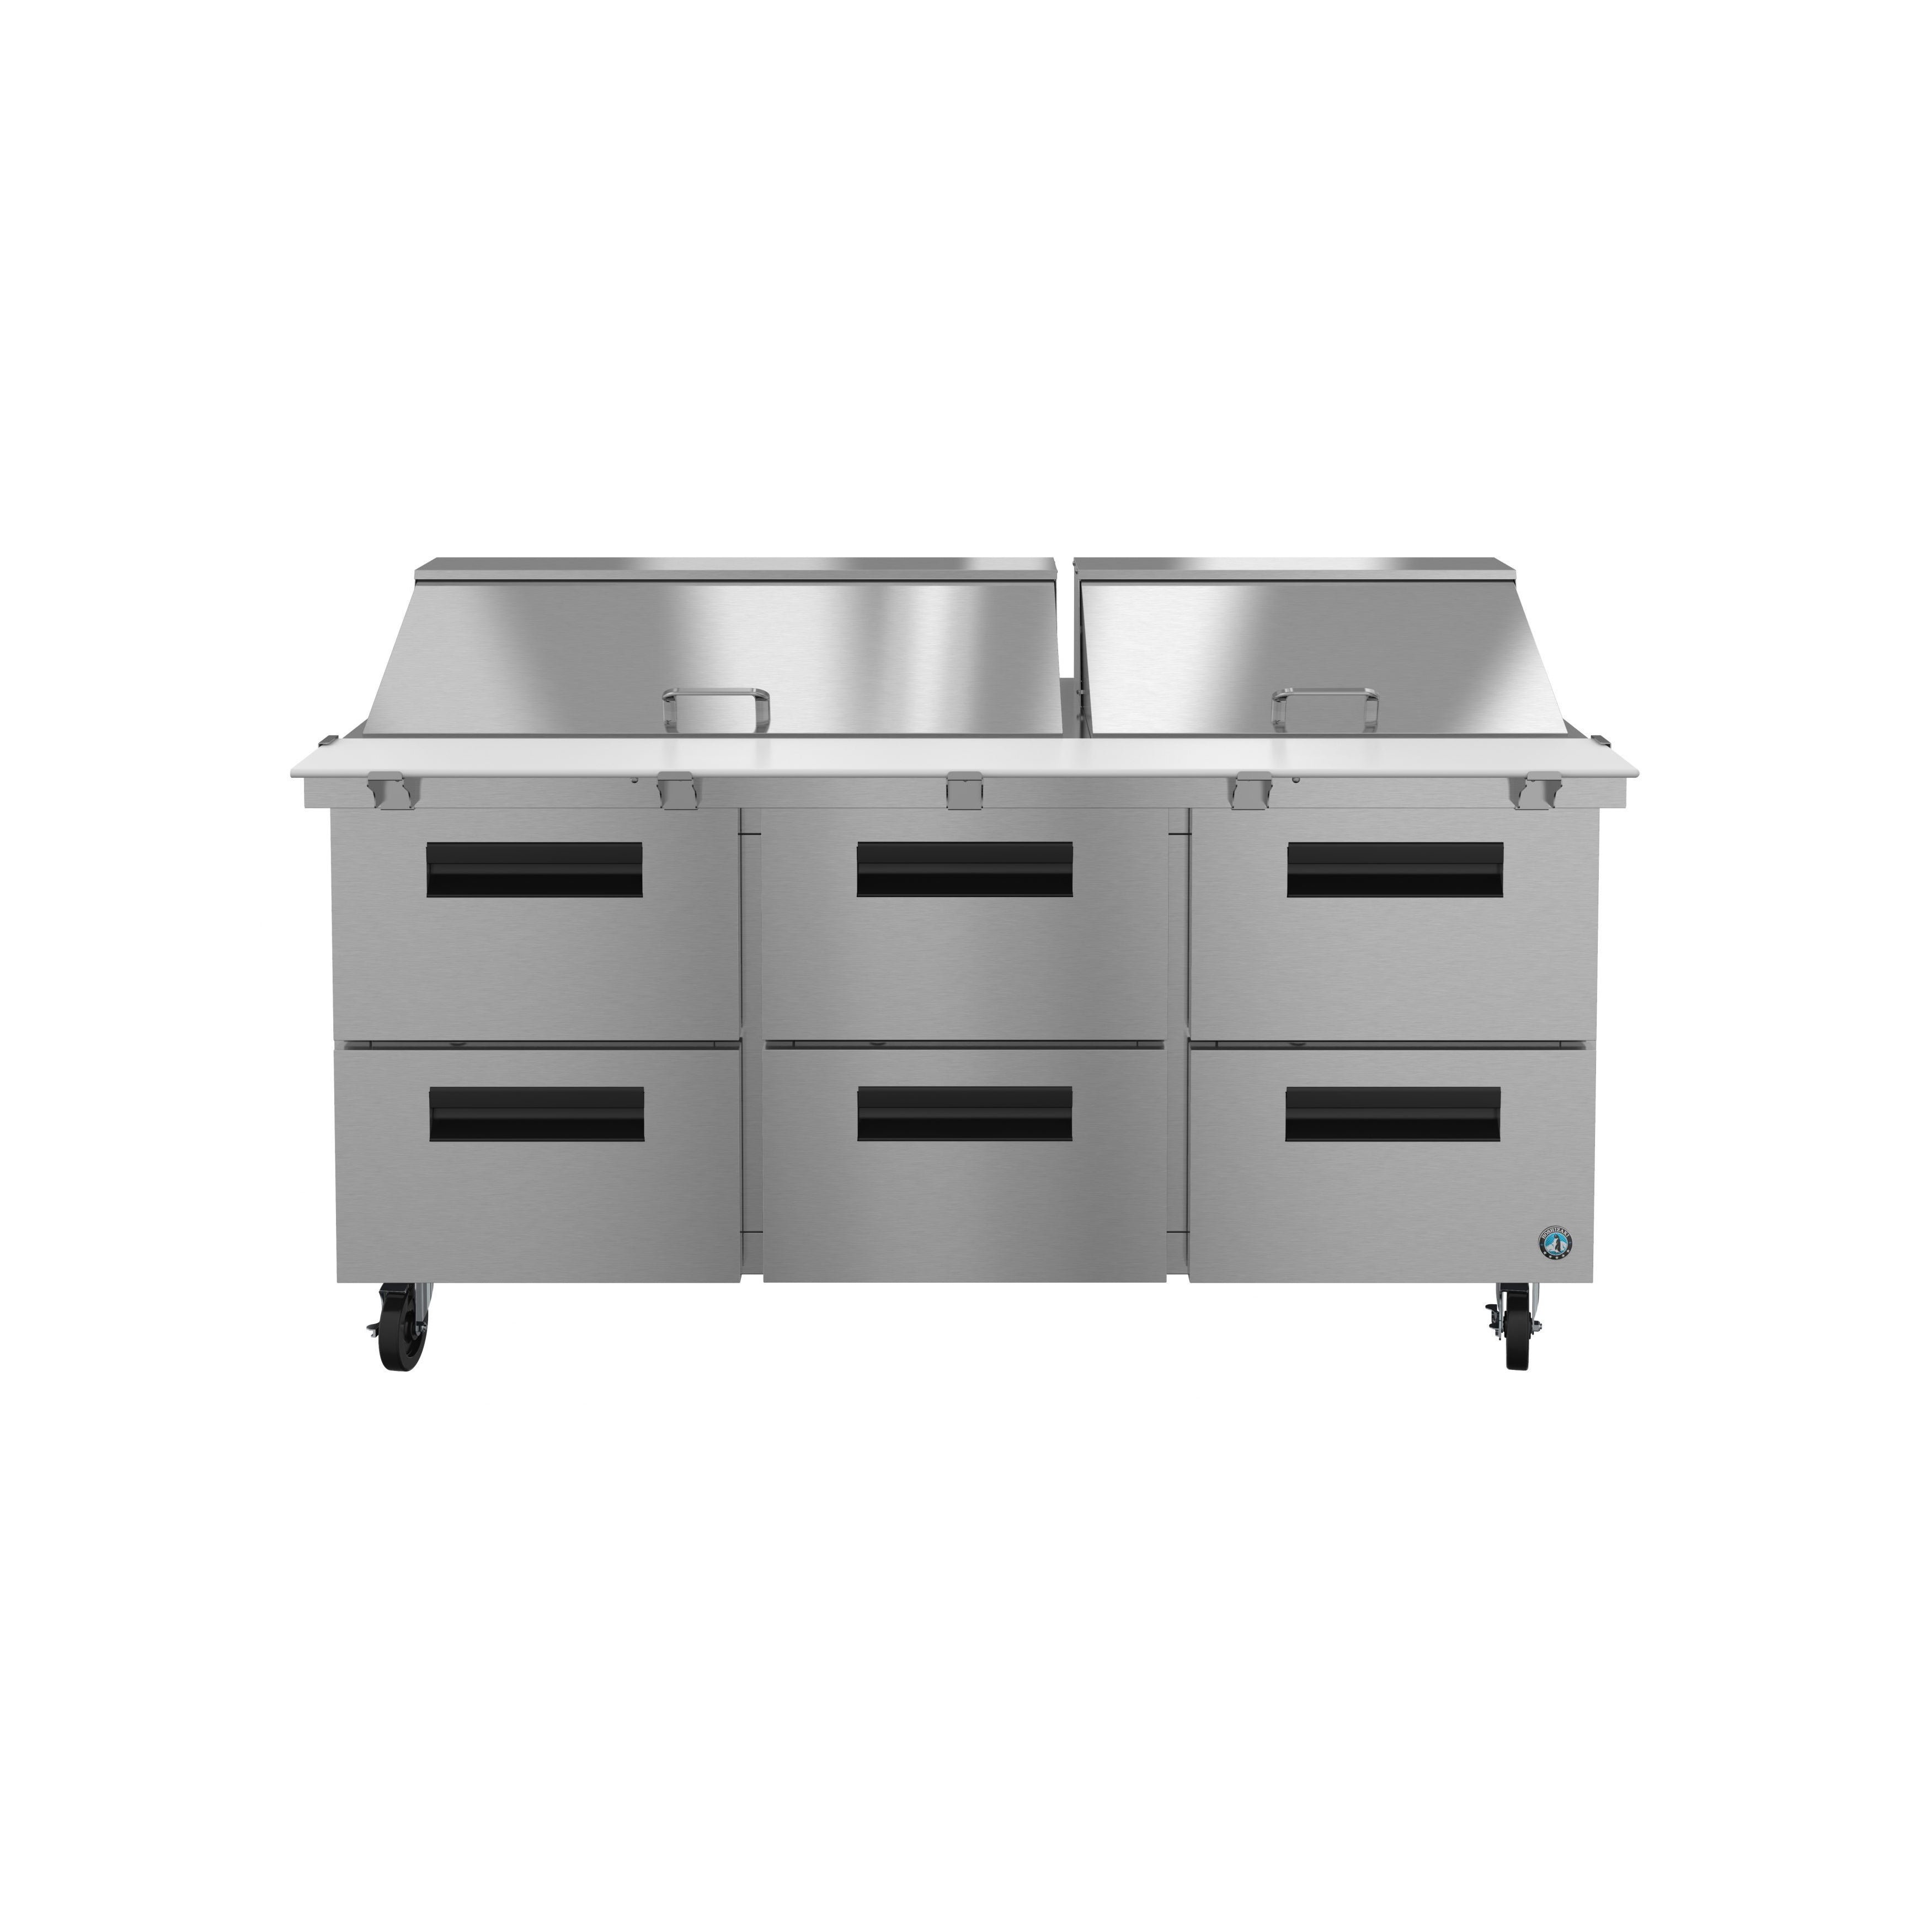 Hoshizaki - SR72A-30MD6, Commercial 72" 6 Drawer Mega Top Stainless Steel Refrigerated Sandwich Prep Table 18.63cu.ft.